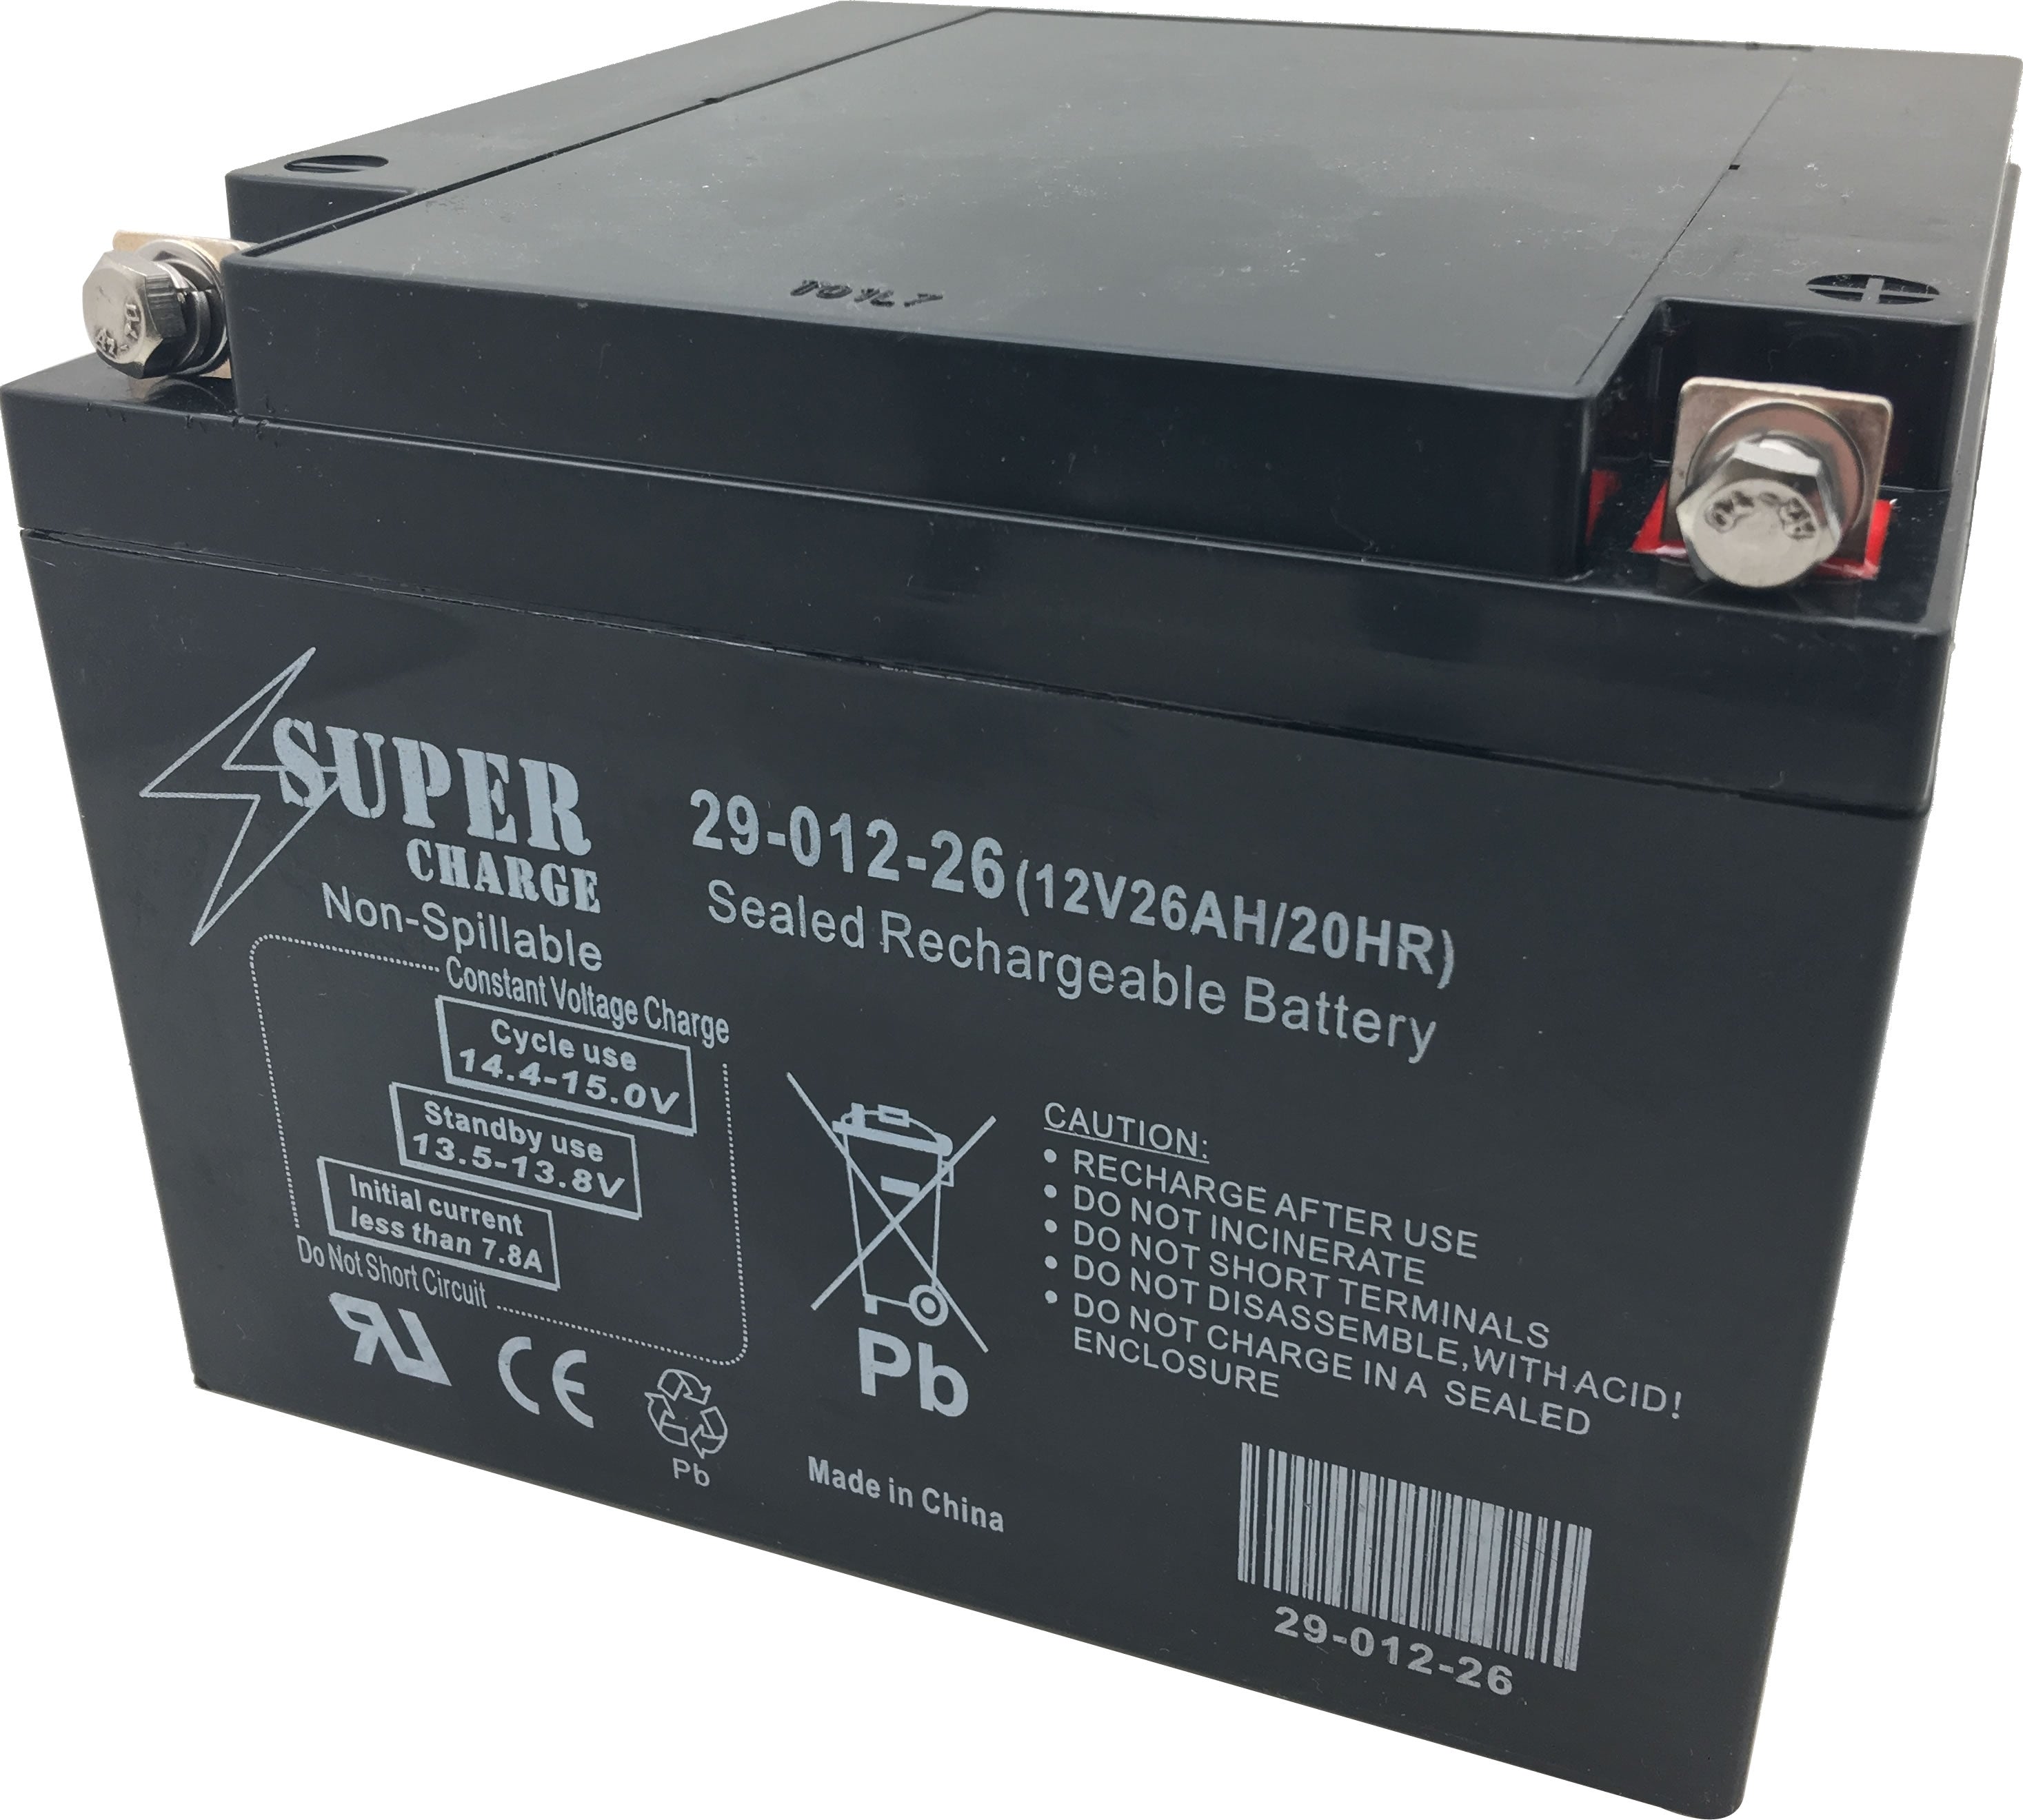 29-012-26 Rechargeable Battery 12V 26AH 20HR